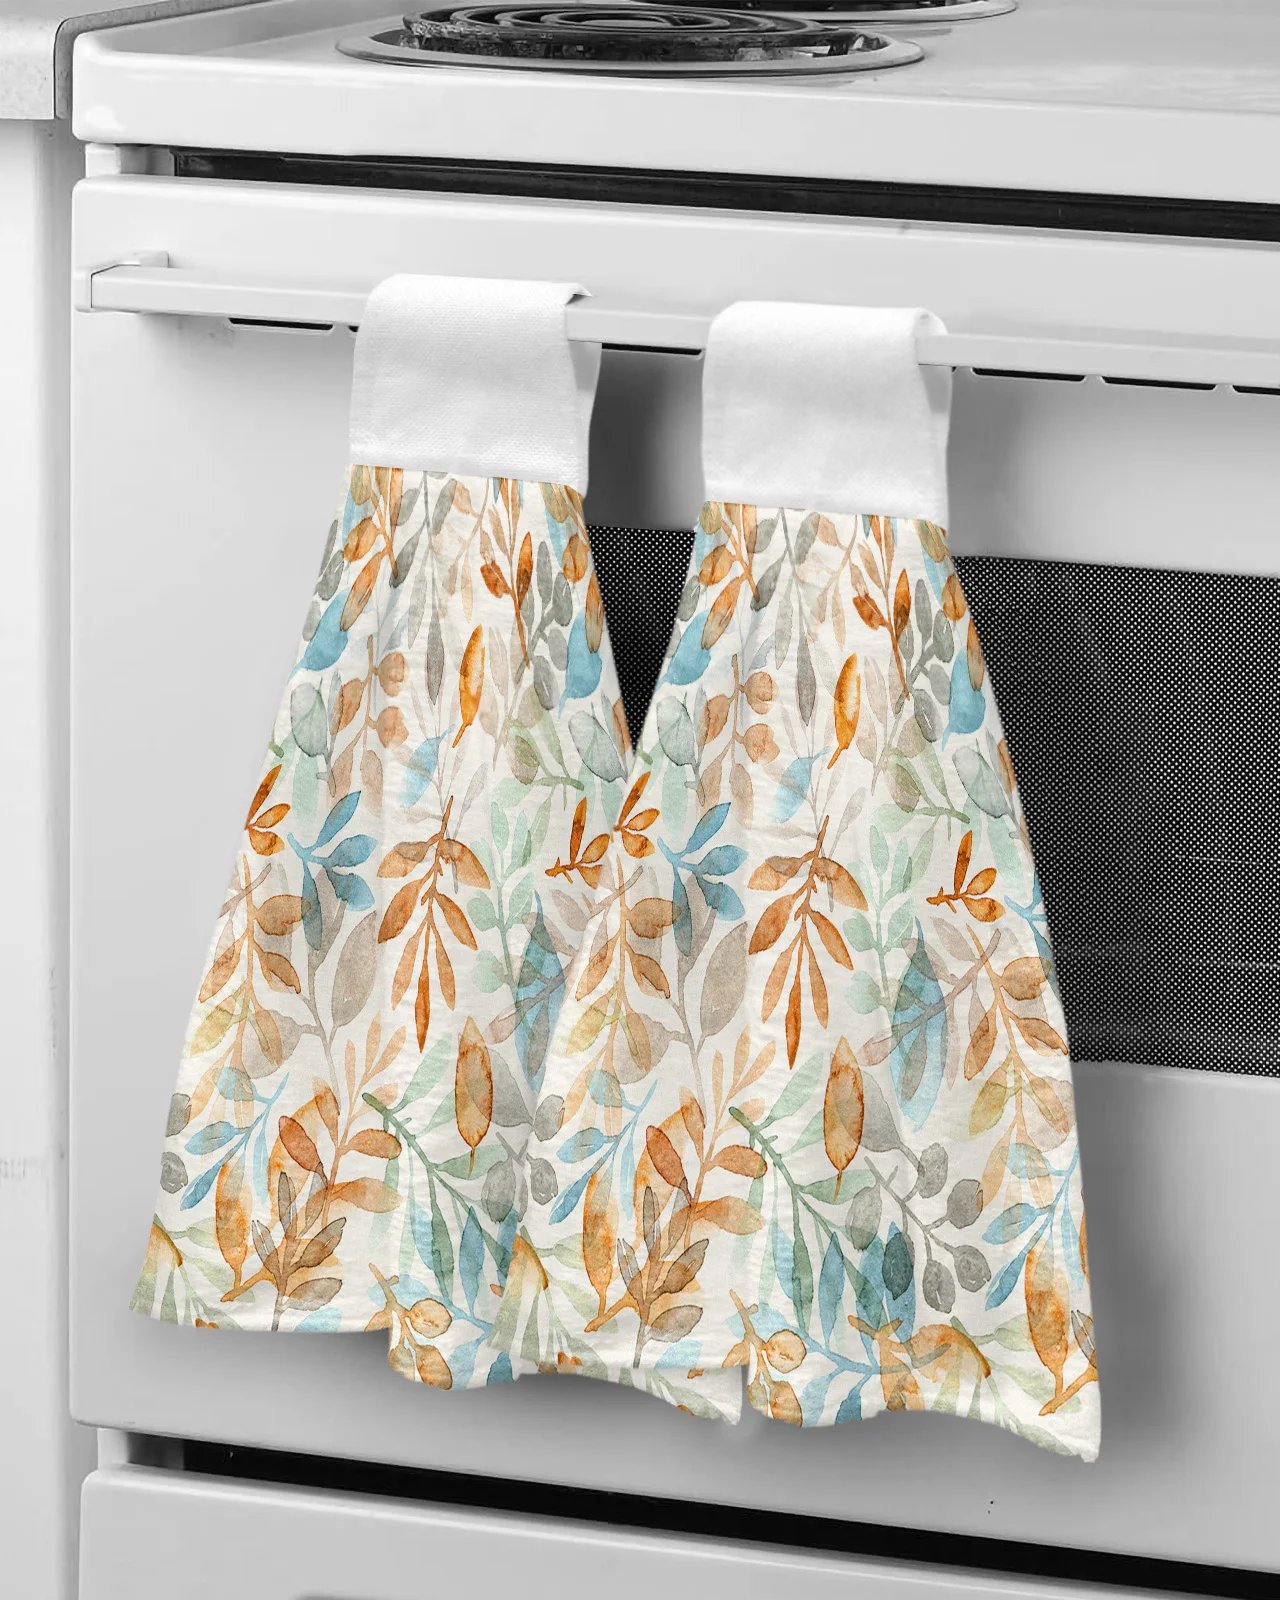 

Autumn Watercolor Hand-Painted Leaves Hand Towel for Bathroom Kitchen Absorbent Hanging Towels Microfiber Soft Kids Handkerchief